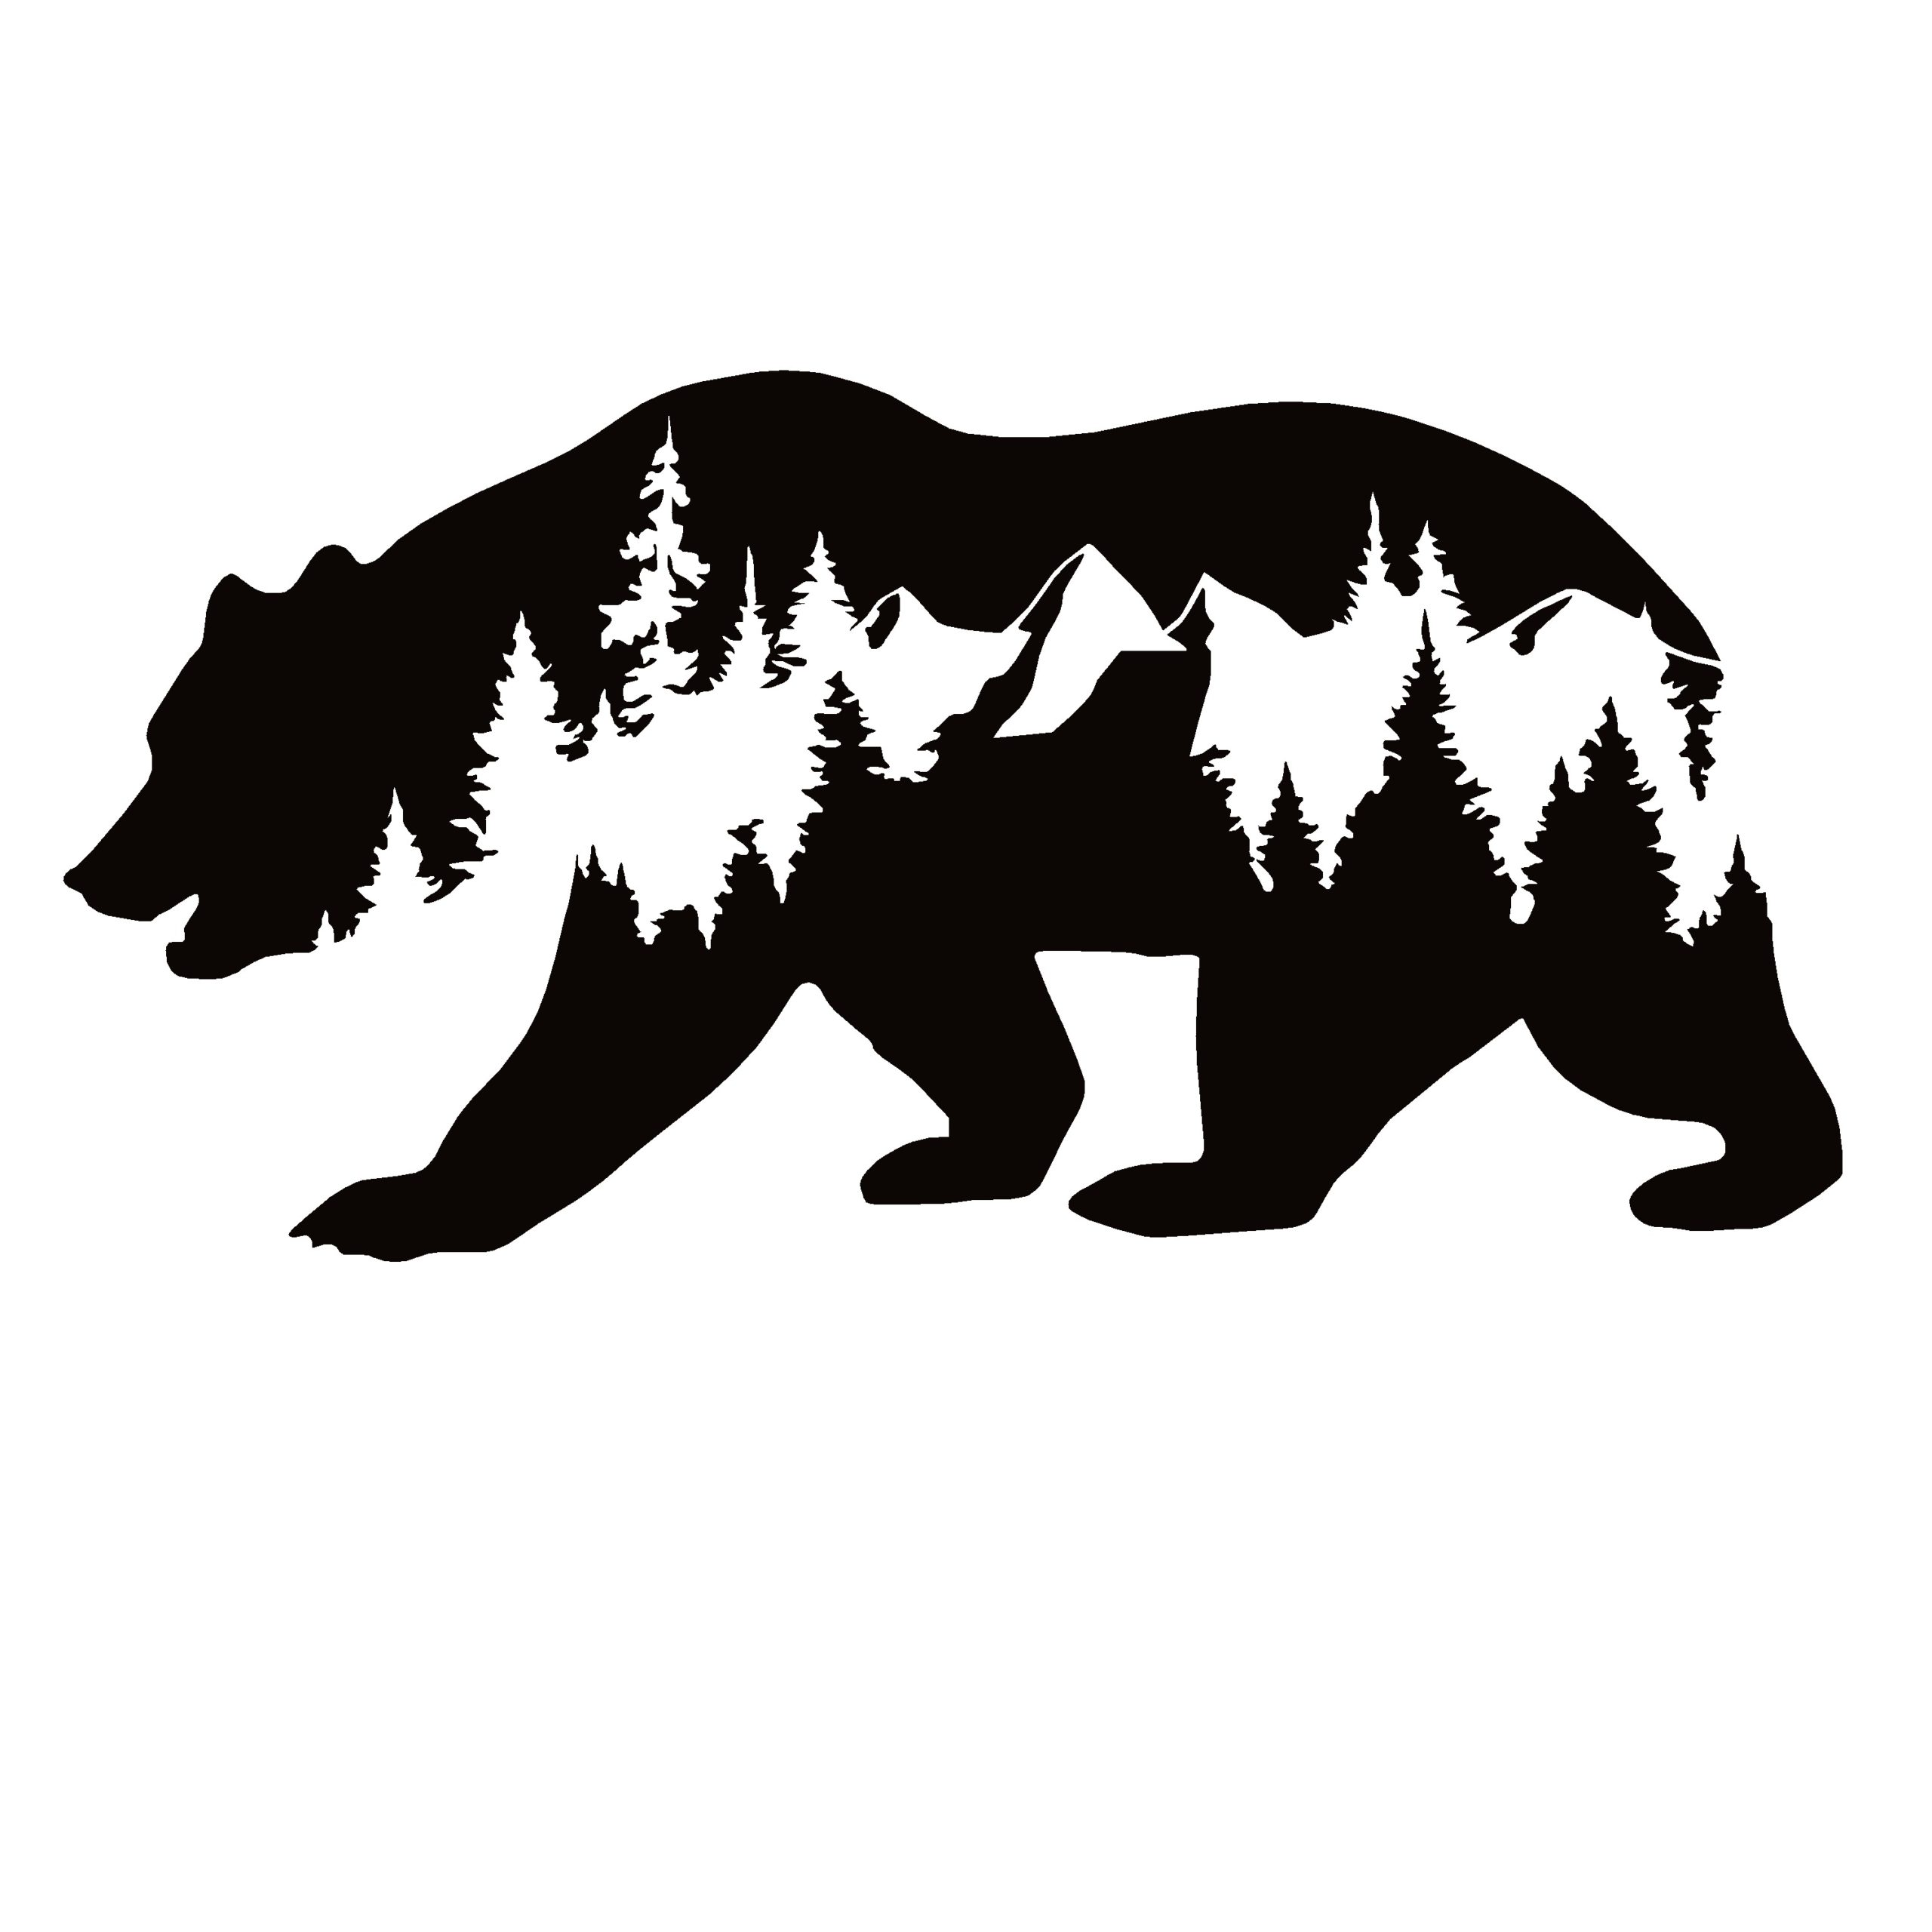 Permanent Vinyl Decal Bear with Mountain Silhouette